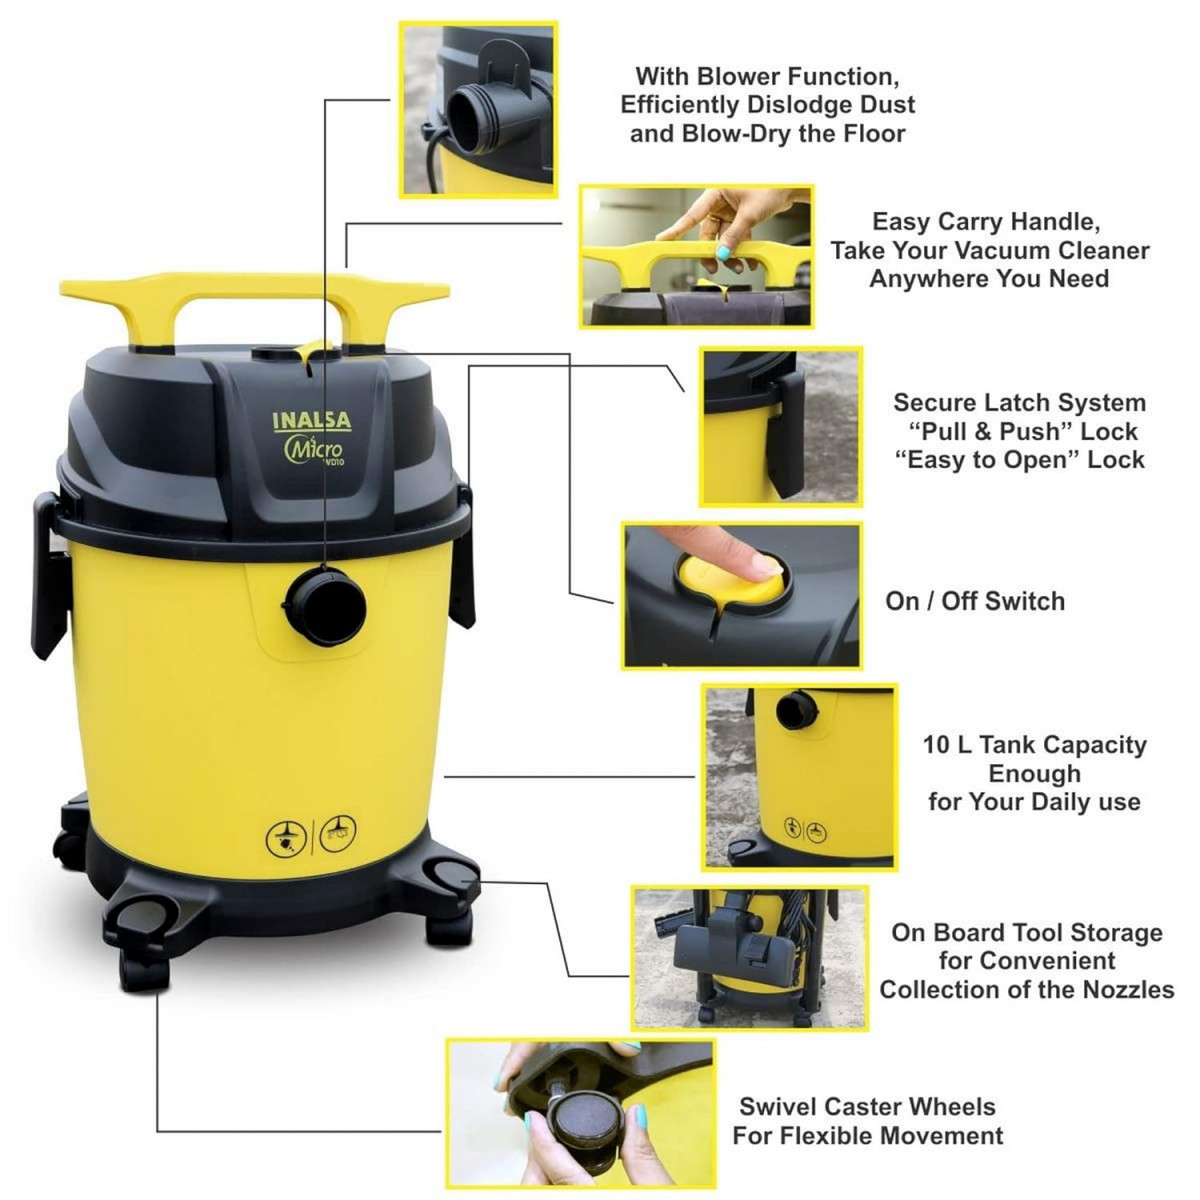 INALSA Wet and Dry Vacuum Cleaner for Home10 ltr Capacity1200 W 17 kPa Suction  Blower Function  HEPA Filter Wet Vacuum Cleaner for Sofa House Cleaning MachineVaccine Cleaner for HomeWD 10